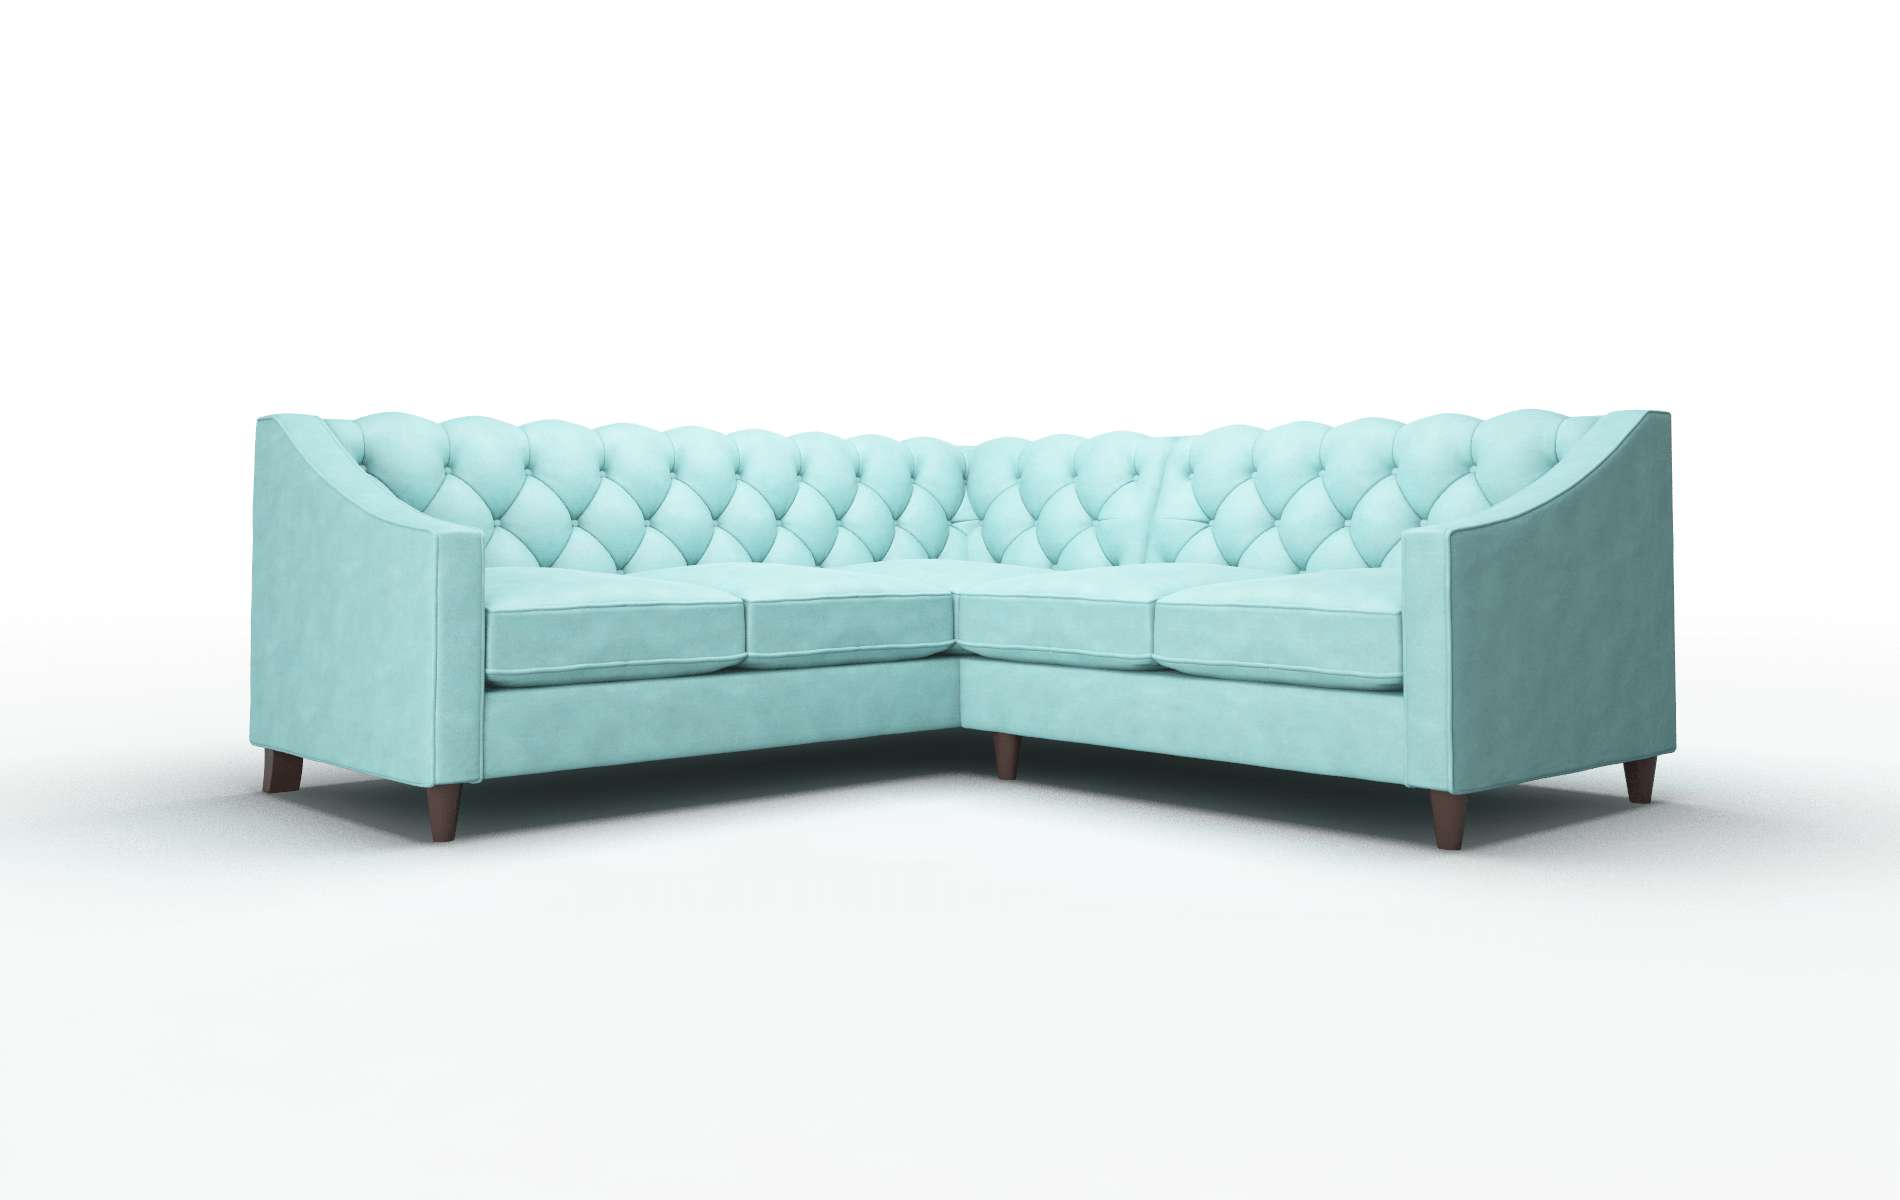 Manchester Curious Turquoise Sectional espresso legs